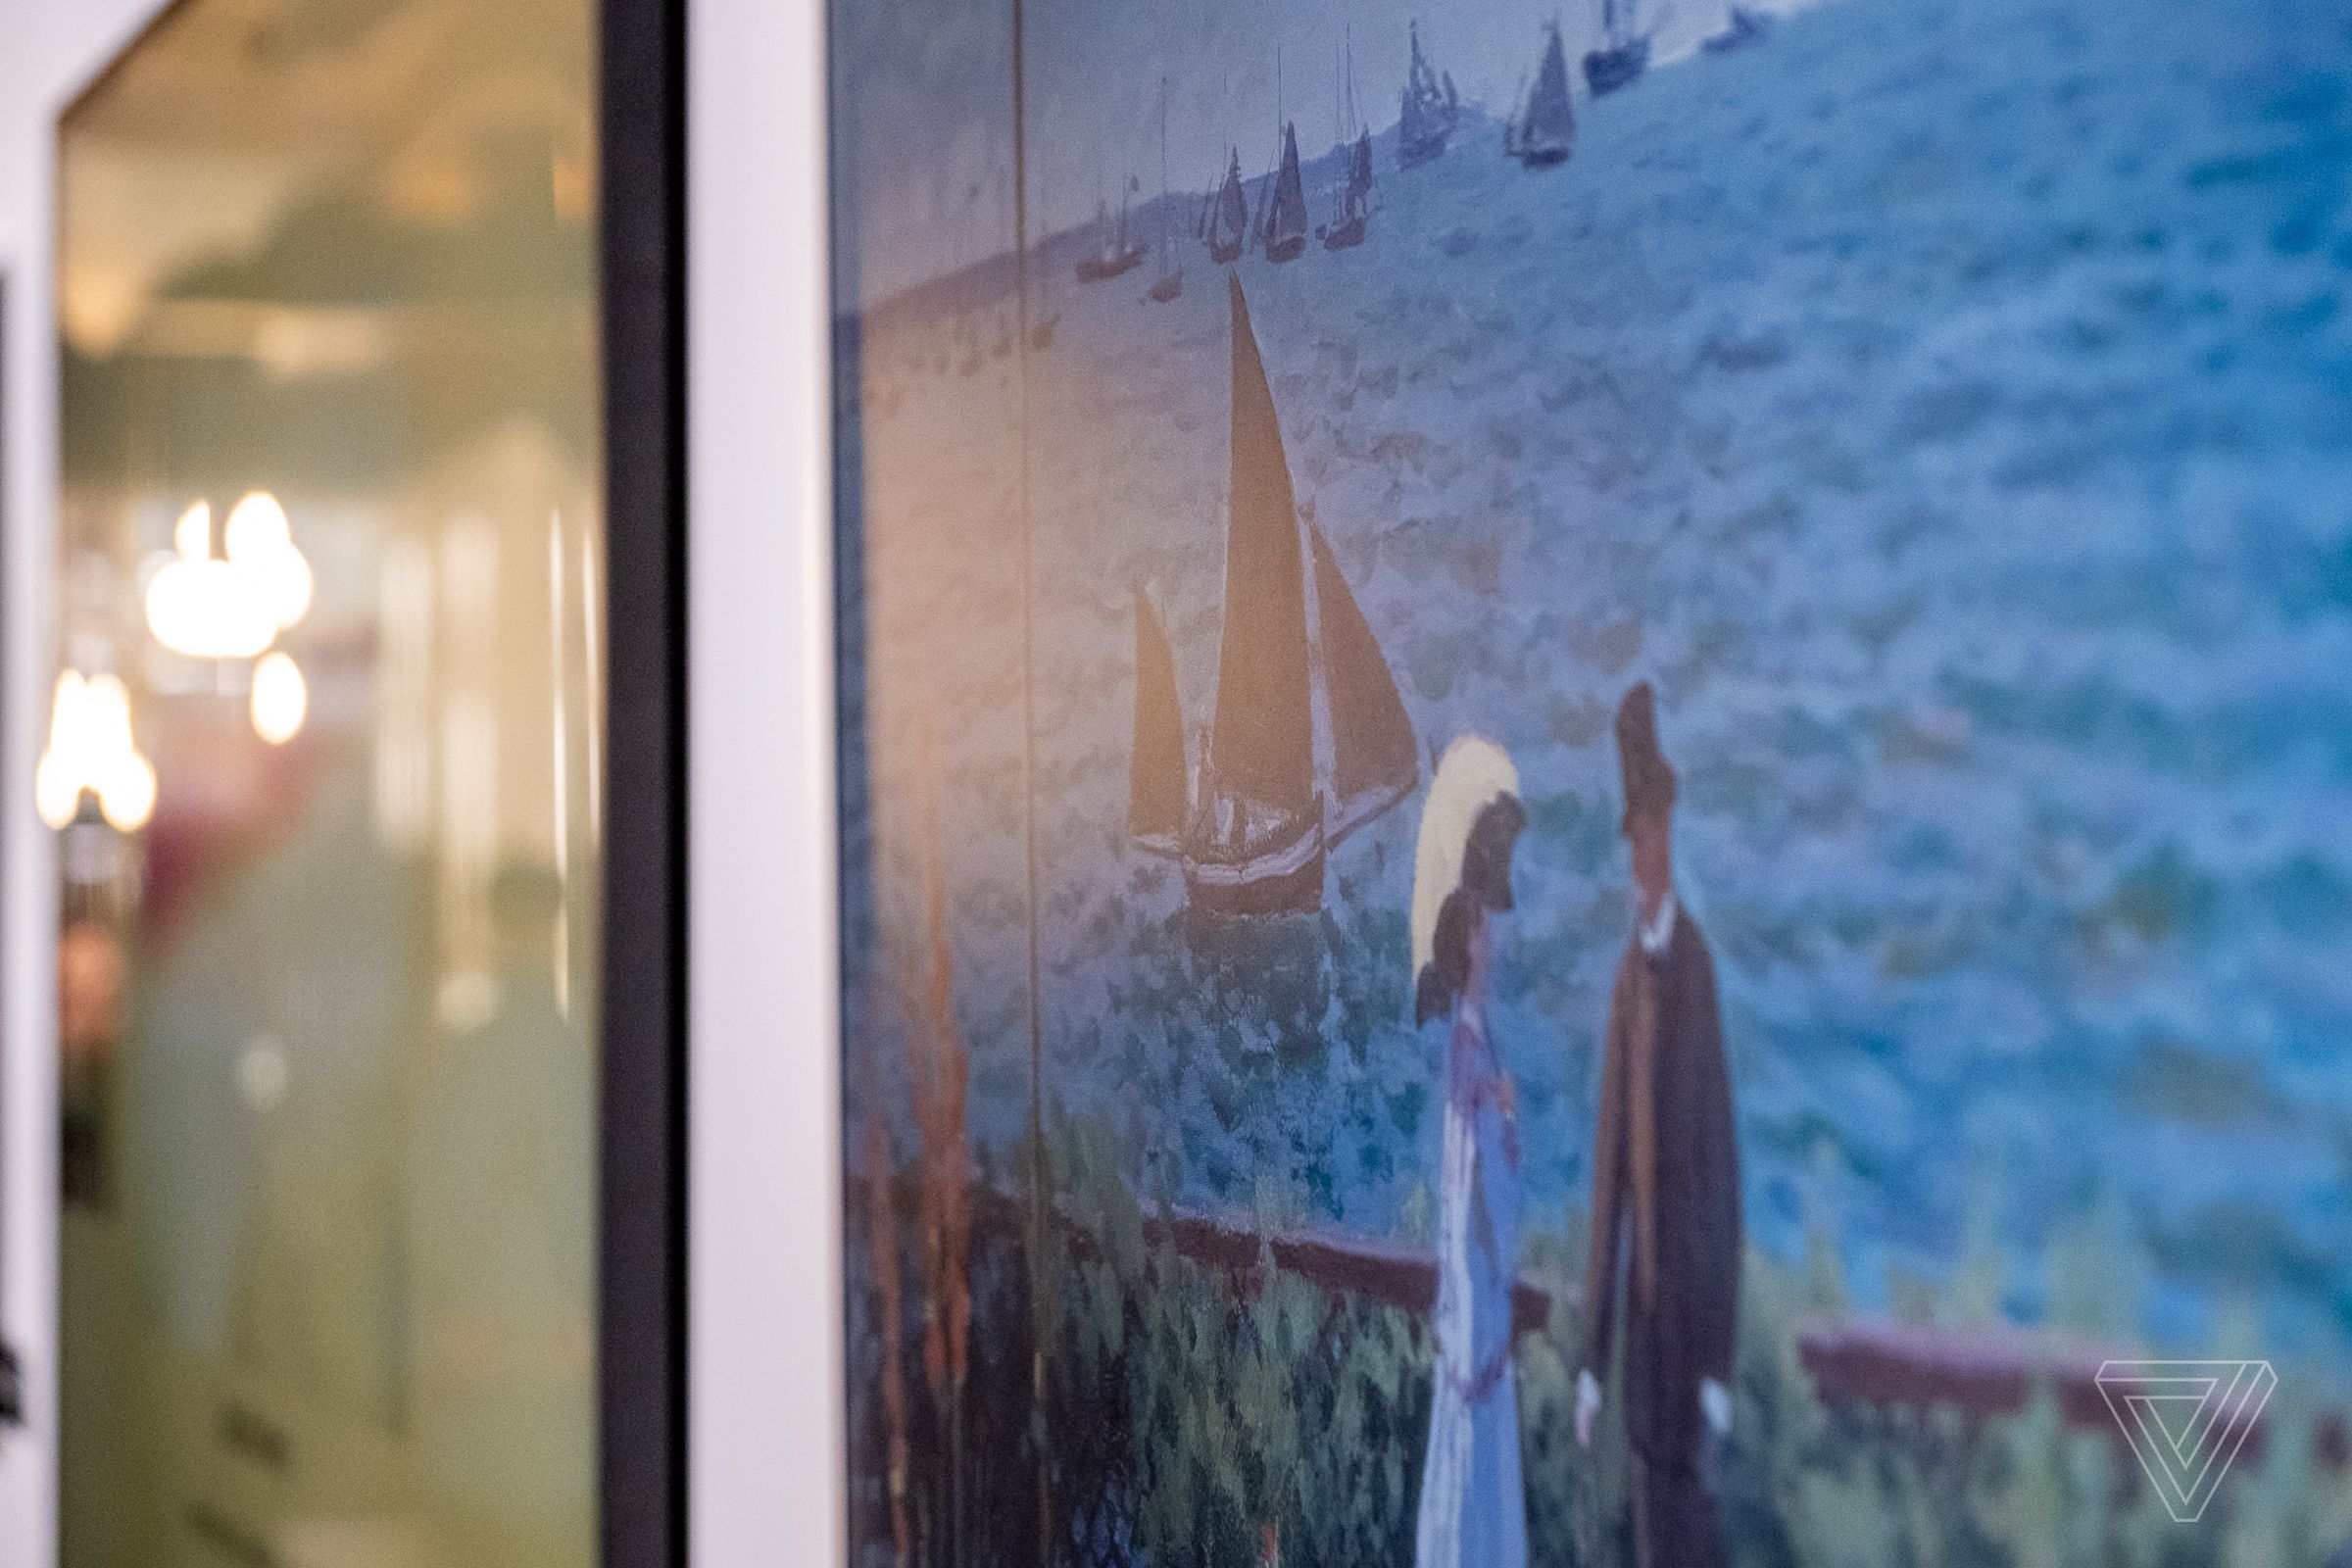 Yep, that’s Samsung’s The Frame TV — not a canvas painting.